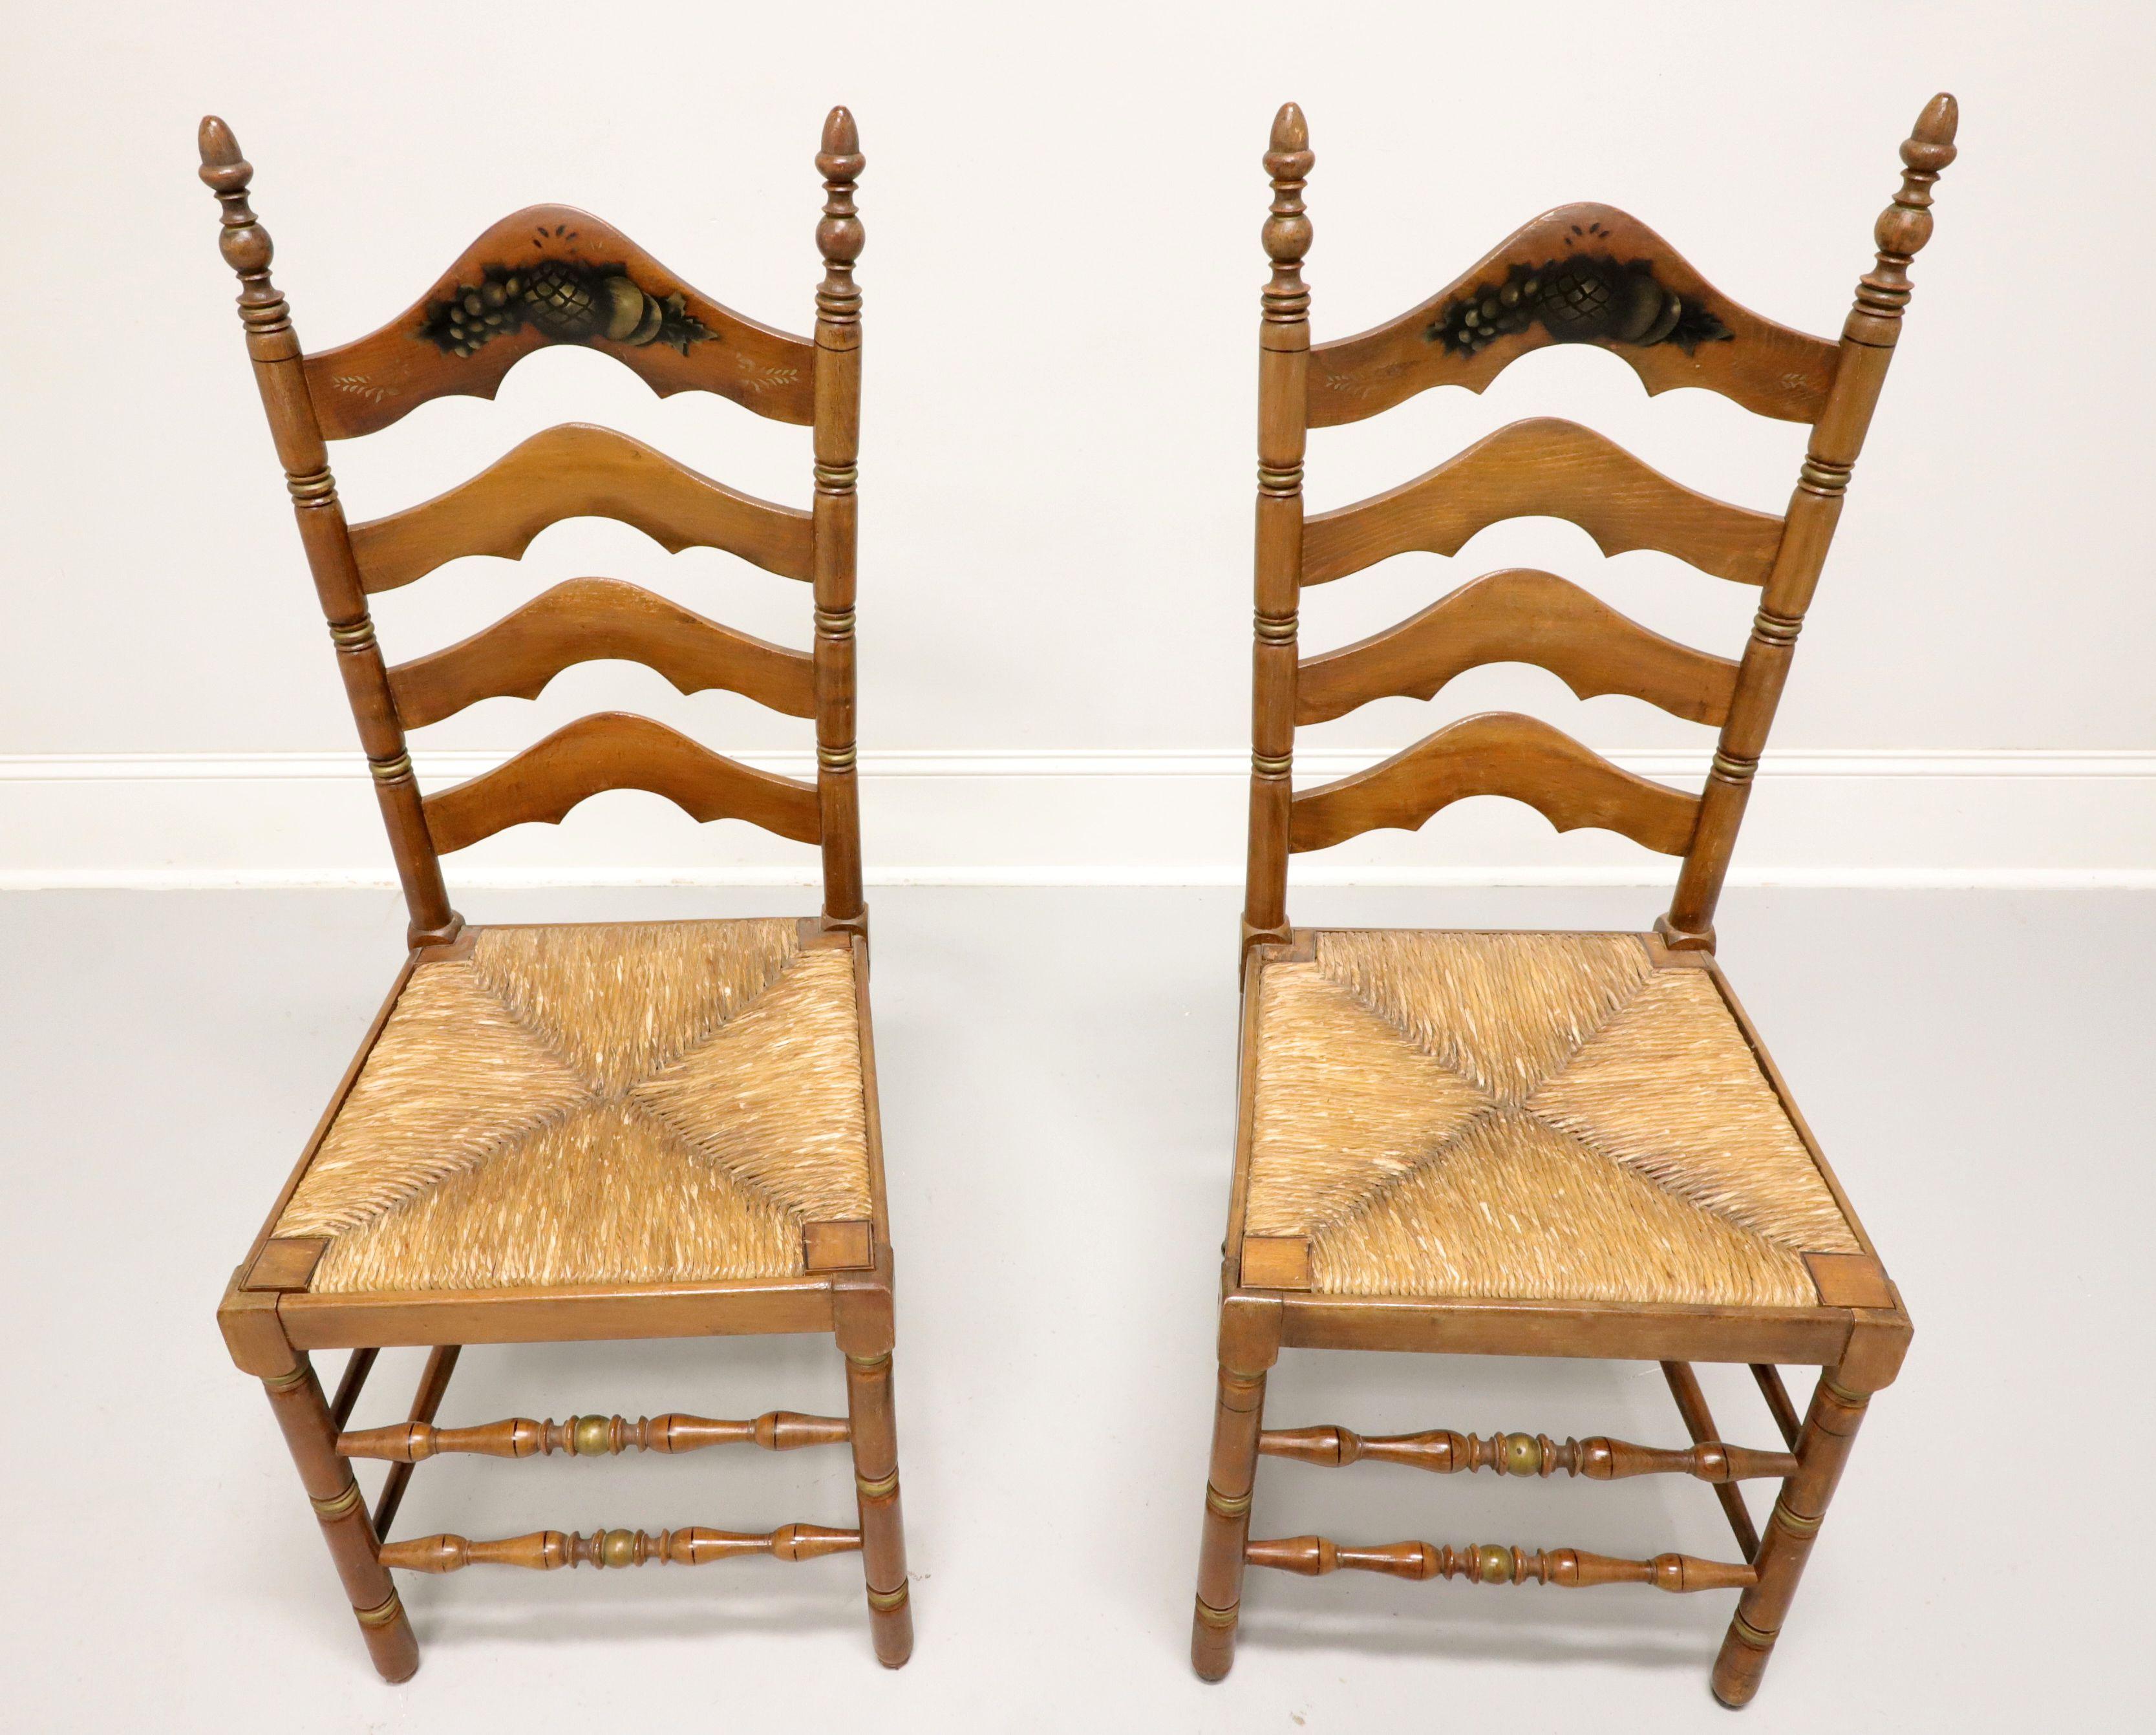 A pair of Cottage / Farmhouse style dining side chairs by Cape Ann Chairs. Maple with carved arched ladder back design, fruit stenciling to front of crest rail, finial capped stiles, rush seats, turned front legs & front stretchers, and solid back